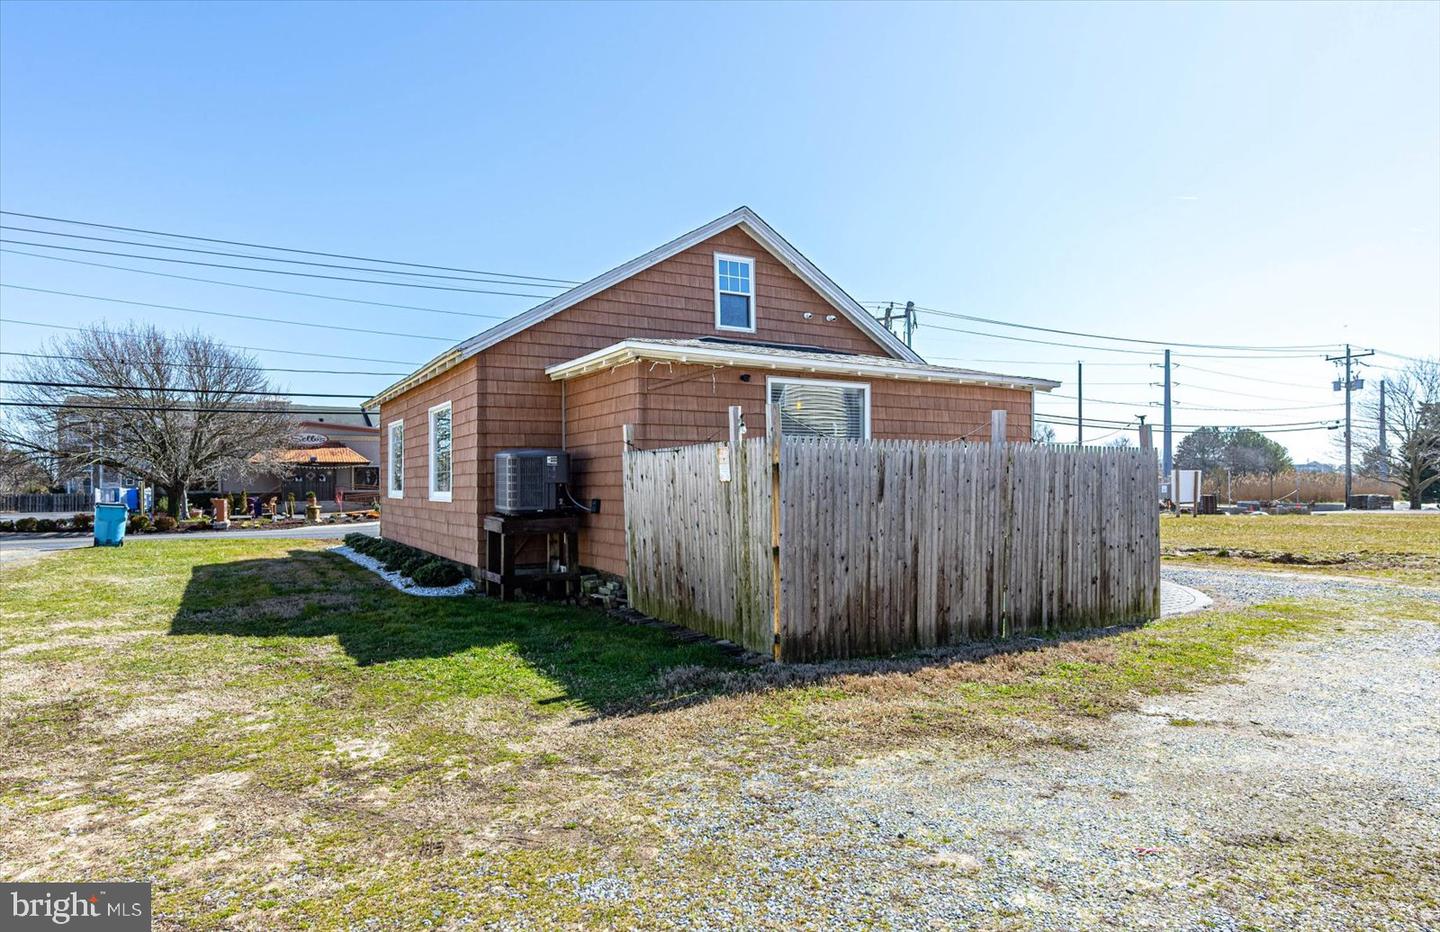 MDWO2019446-802902725466-2024-03-07-00-07-58 9801 / 9805 Golf Course Rd | Ocean City, MD Real Estate For Sale | MLS# Mdwo2019446  - 1st Choice Properties